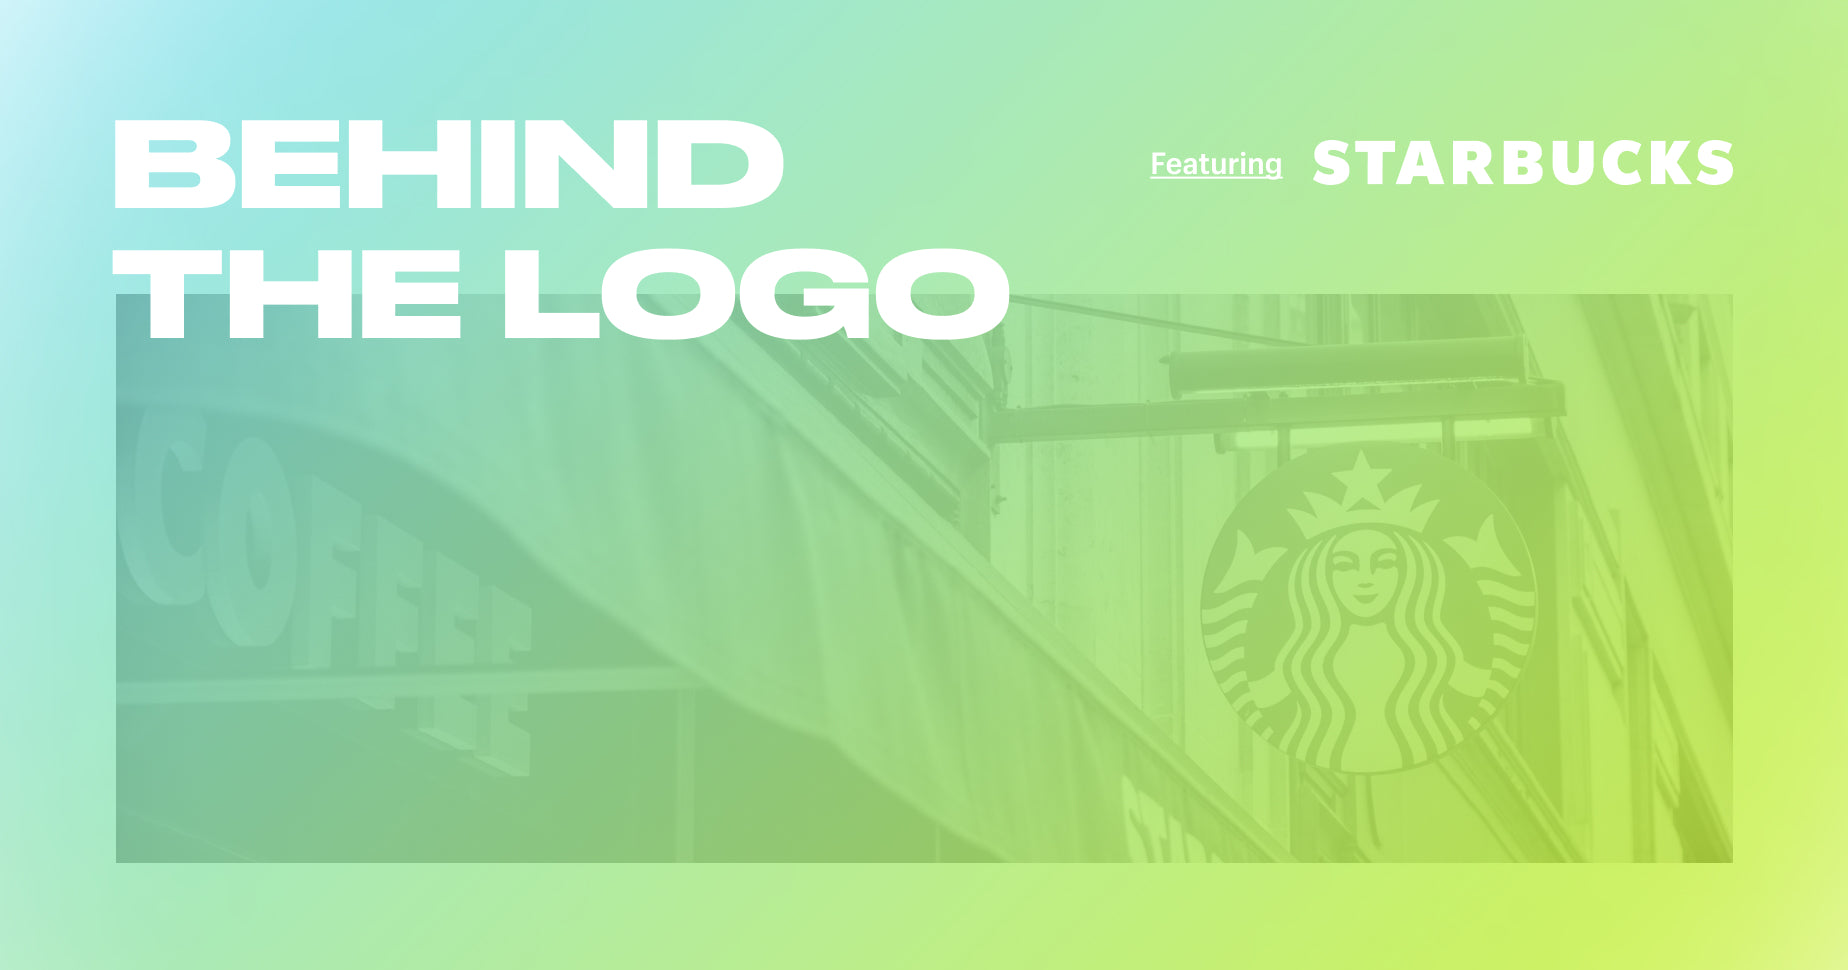 Behind the logo featuring the Starbucks logo